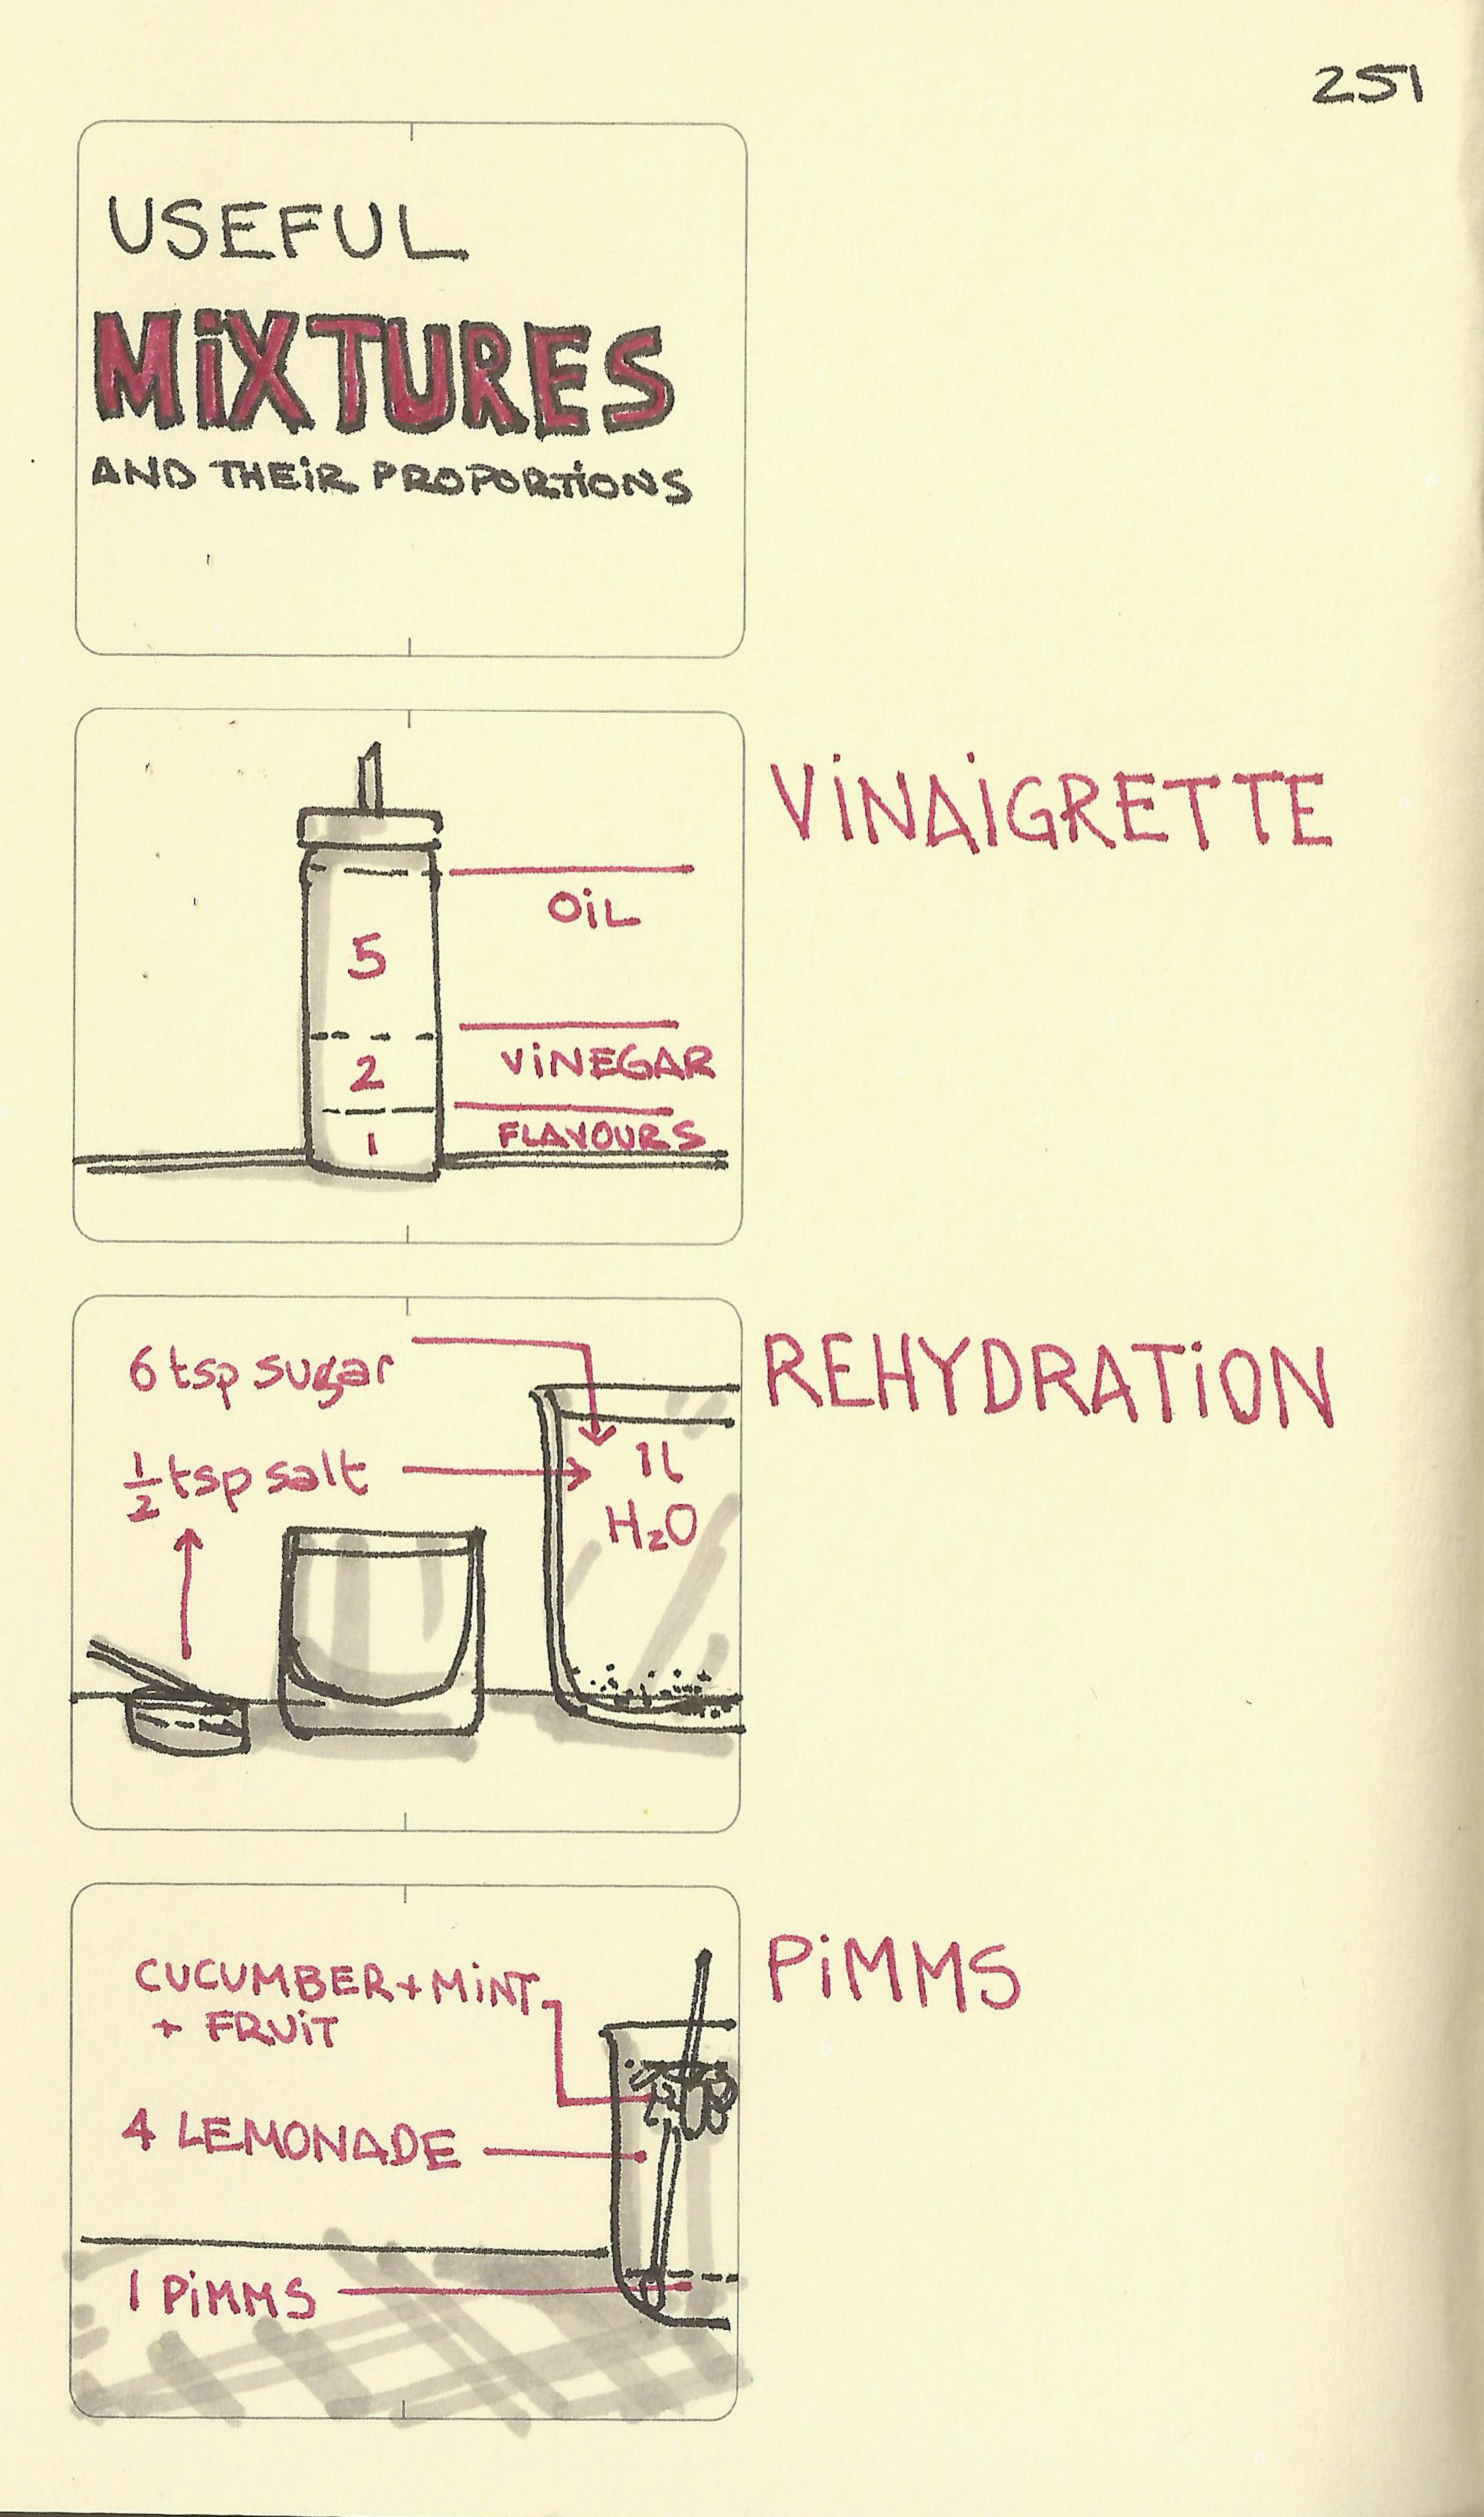 Useful mixtures and their proportions - Sketchplanations